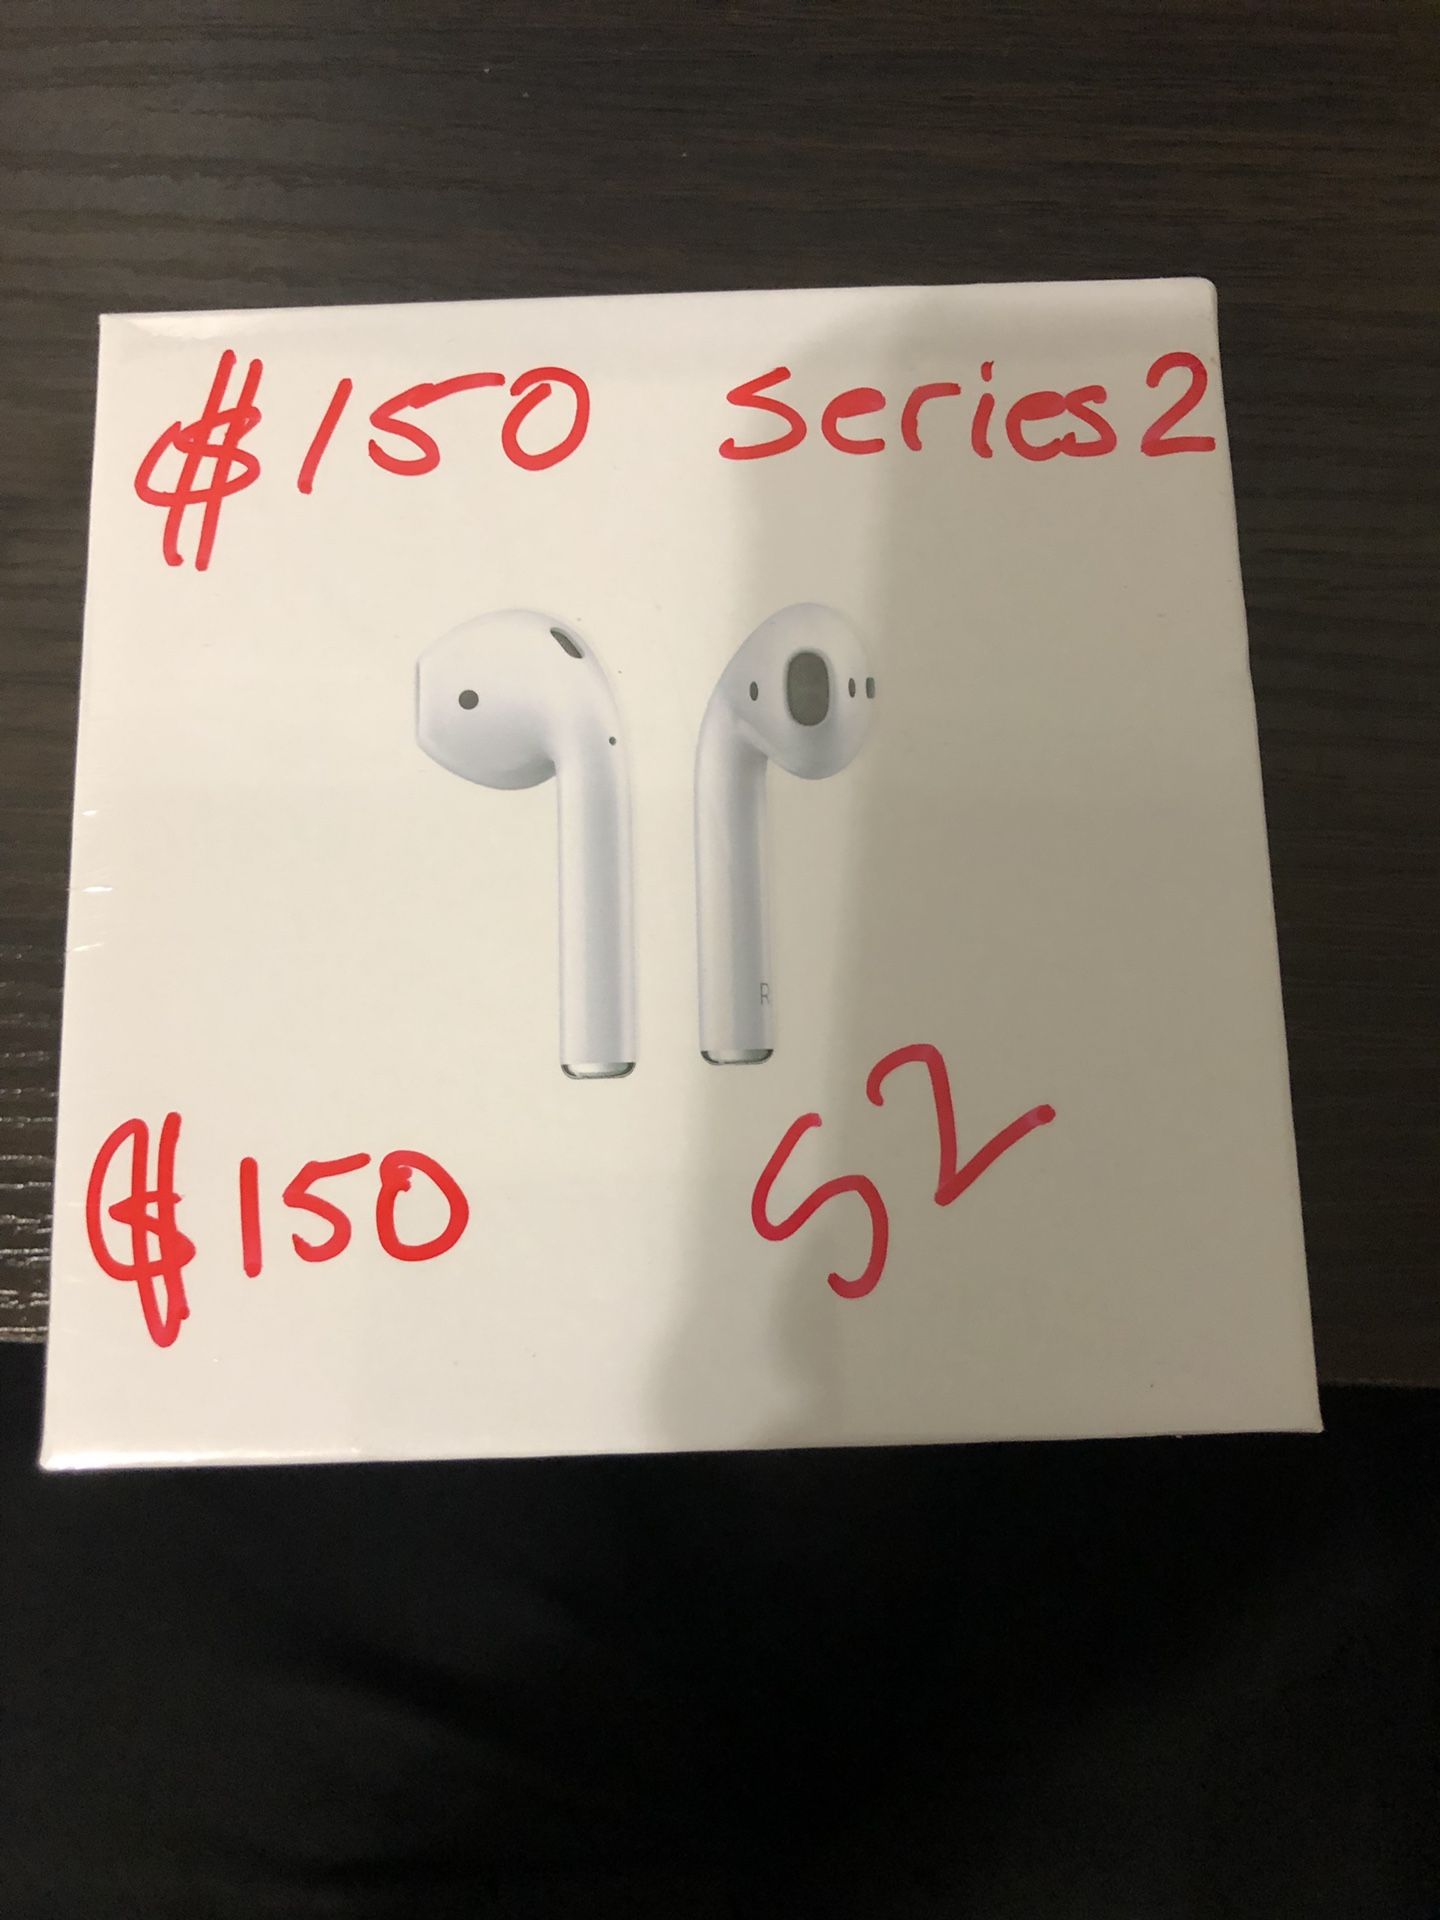 Airpods series 2